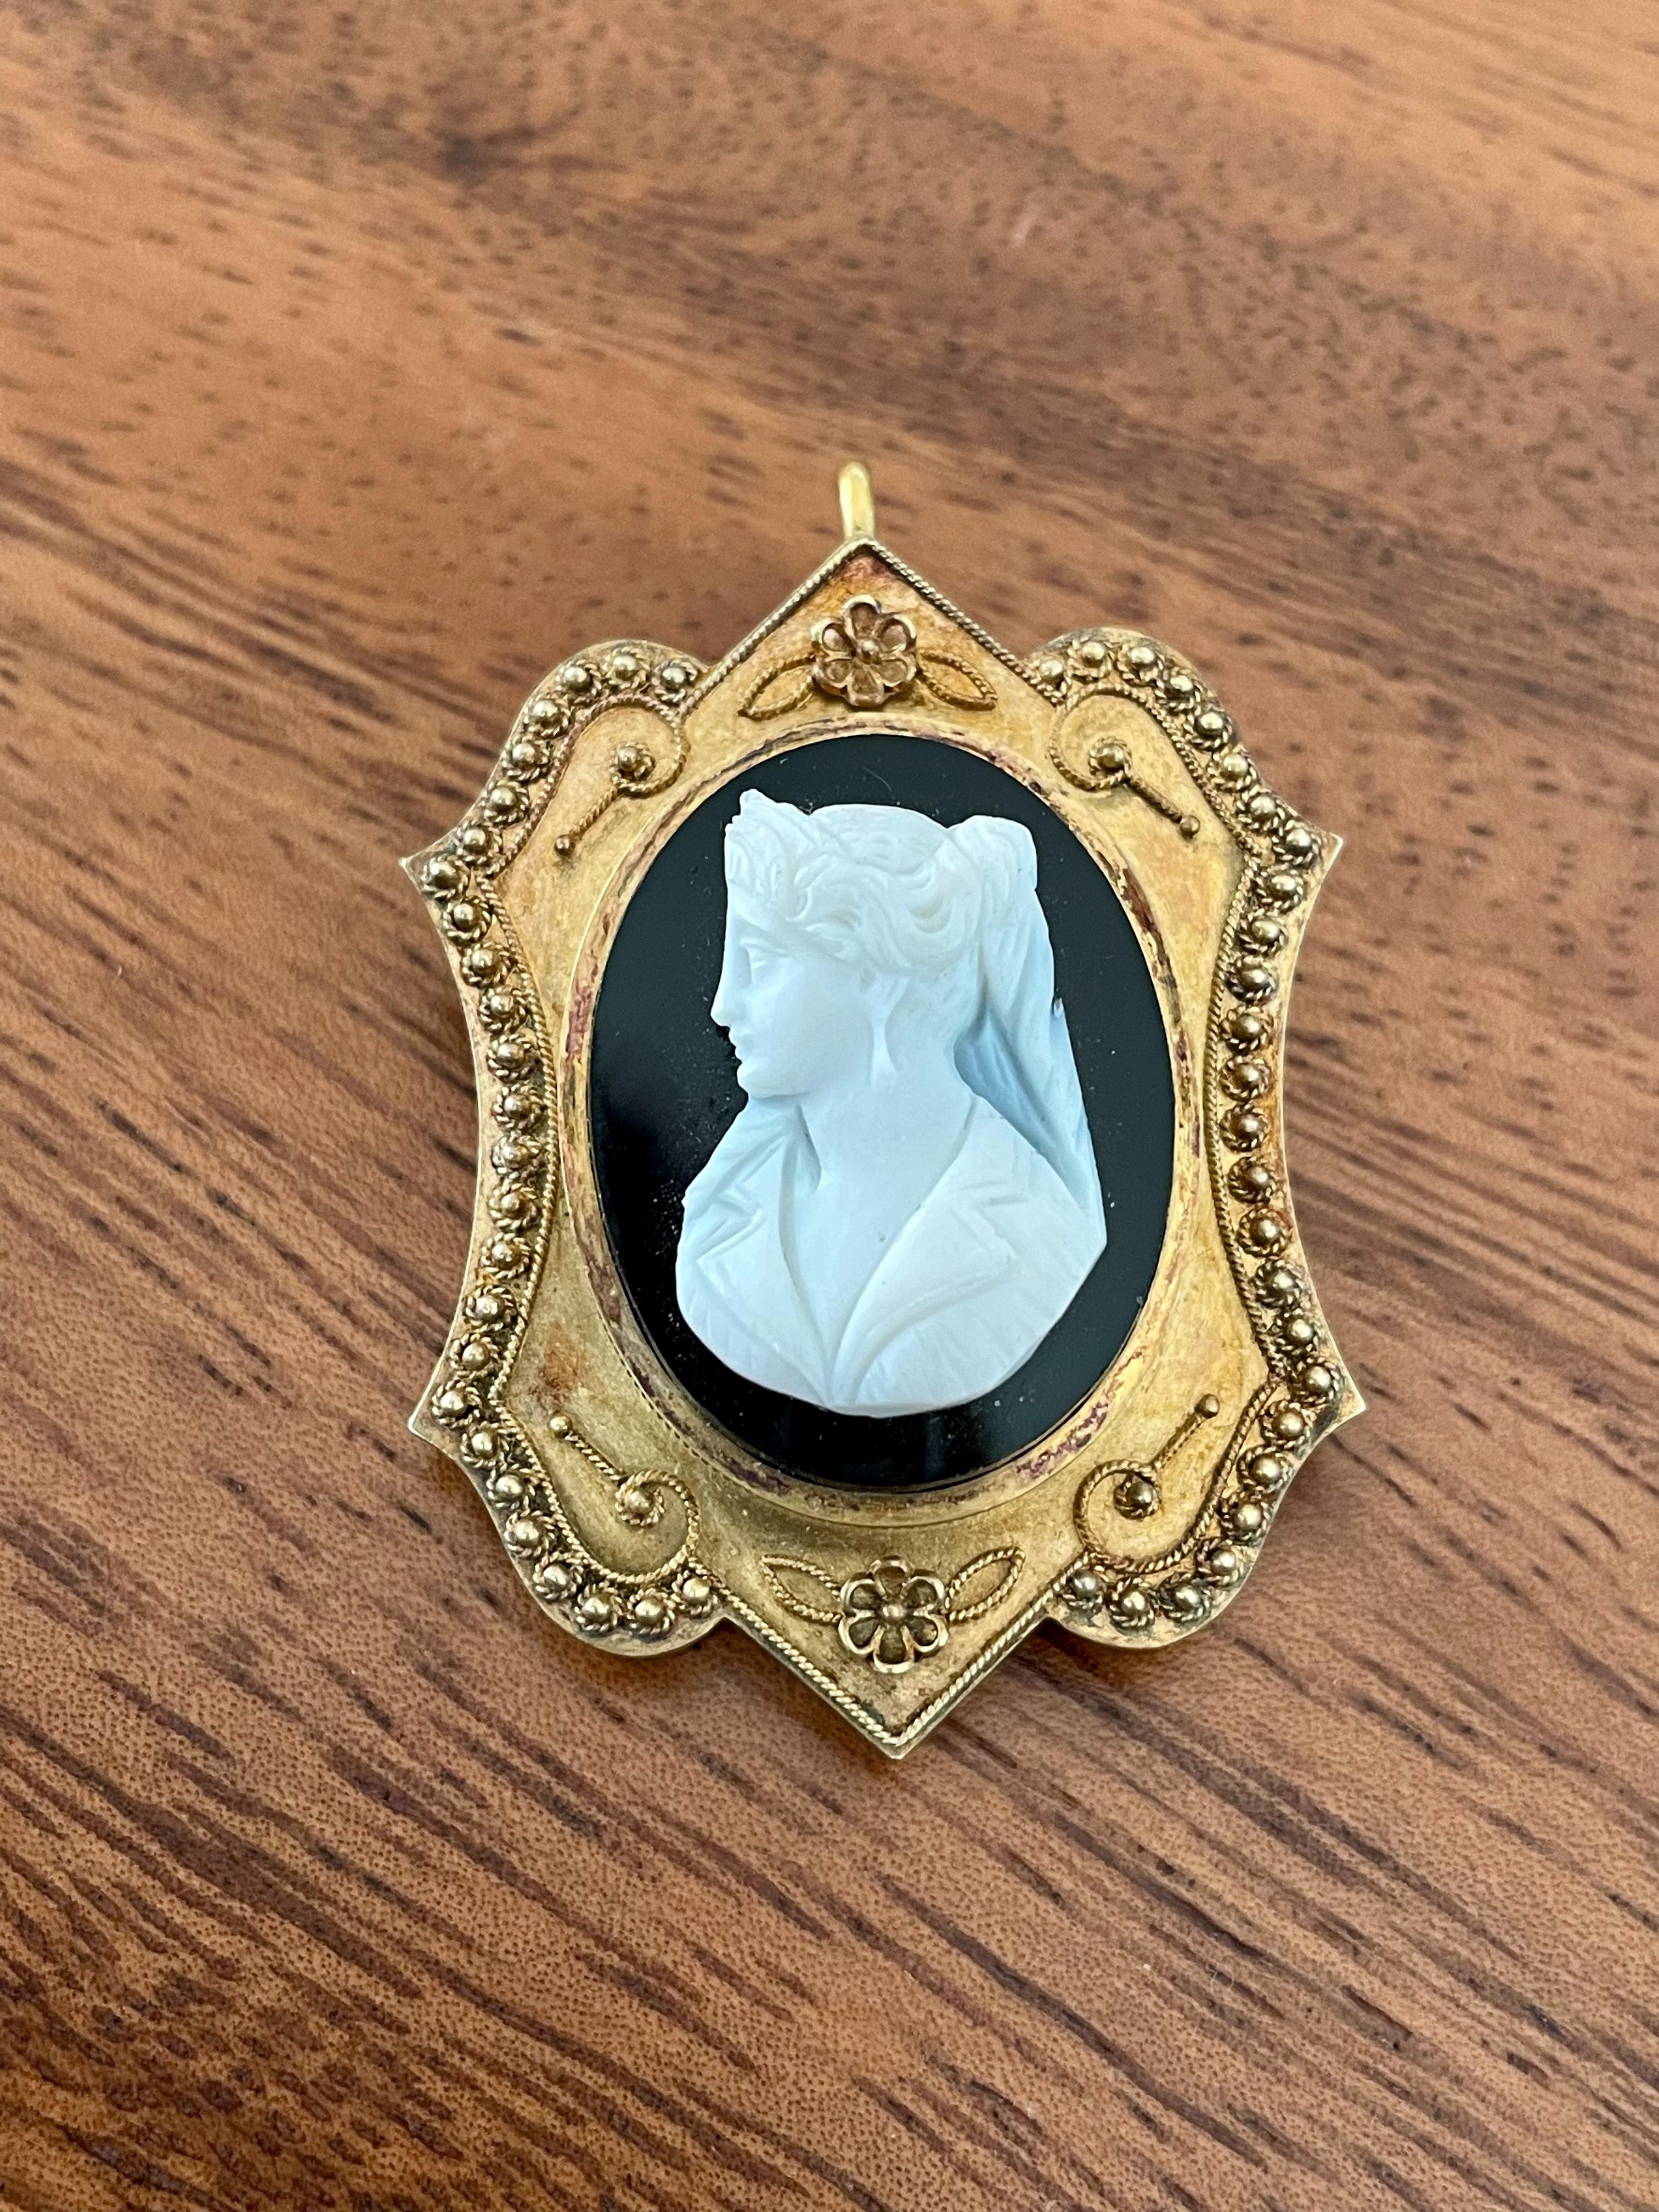 This Victorian cameo is carved from black and white hard stone agate.  It is set in 14 karat yellow Gold.  It can be worn as a pendant or as a brooch.  (Chain shown is shown for photos only and is not included in the sale price).

Weight:  10.5